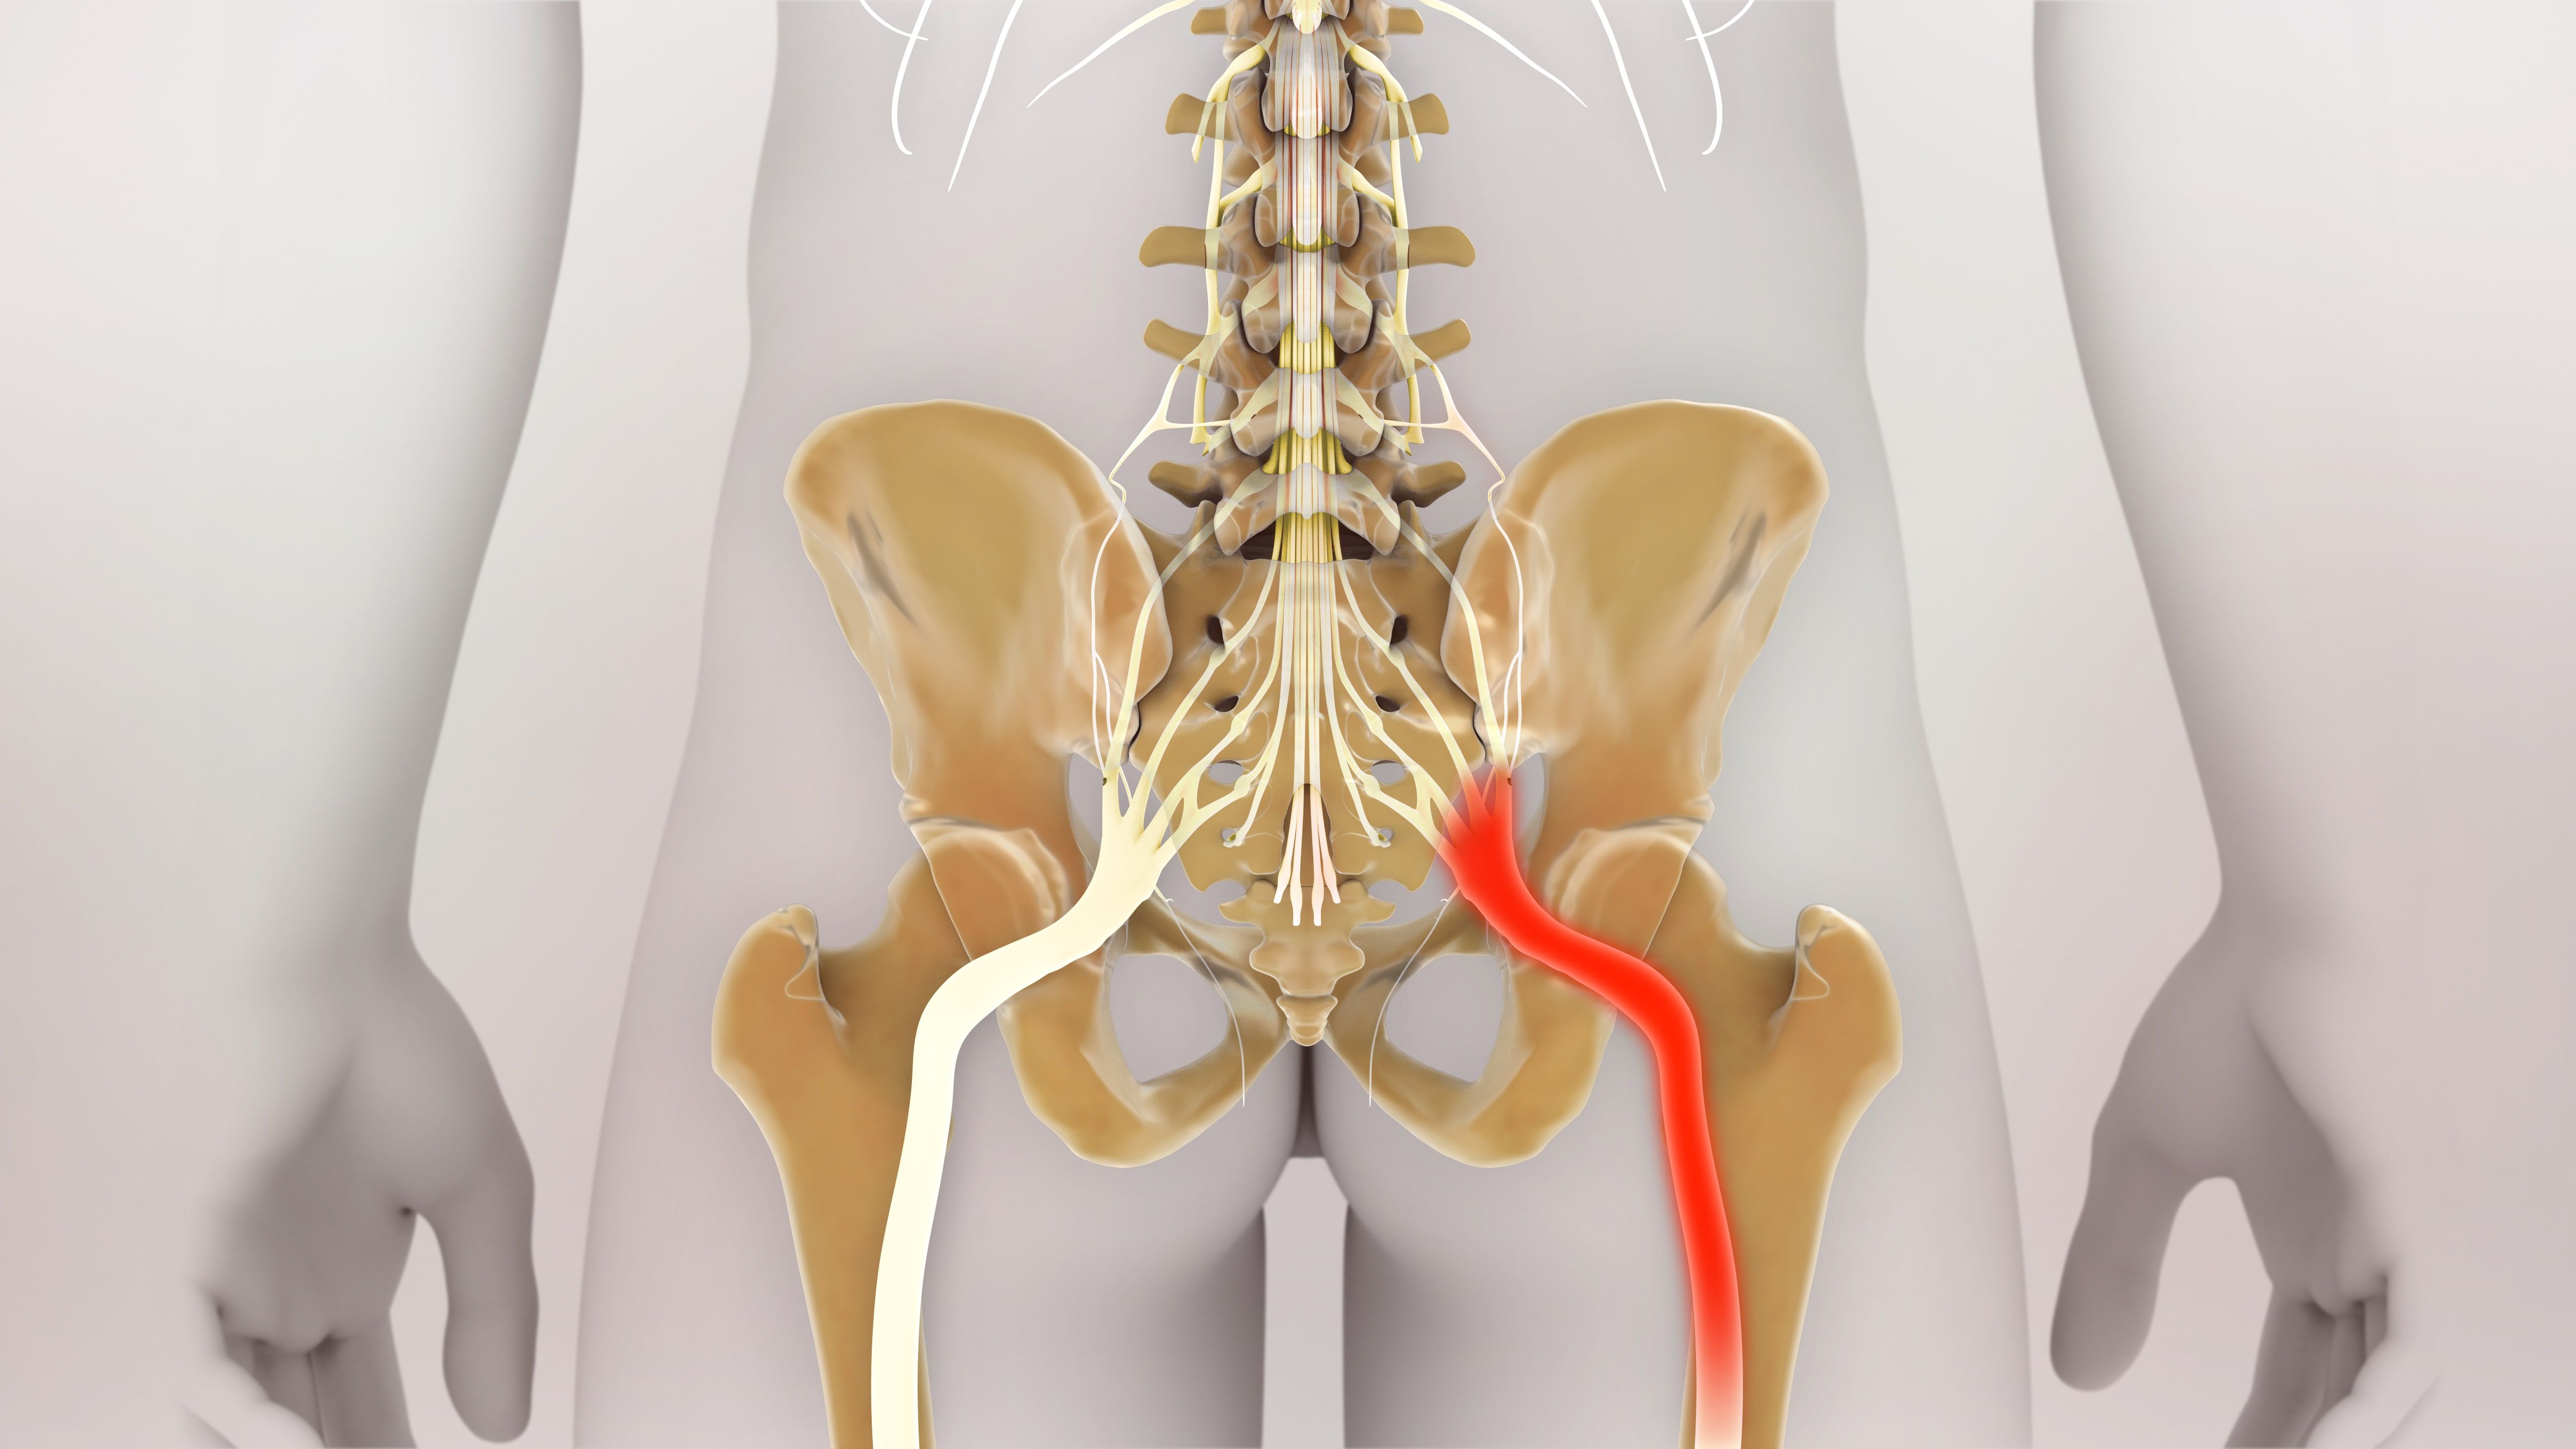 How to Manage Your Sciatica Pain While Driving